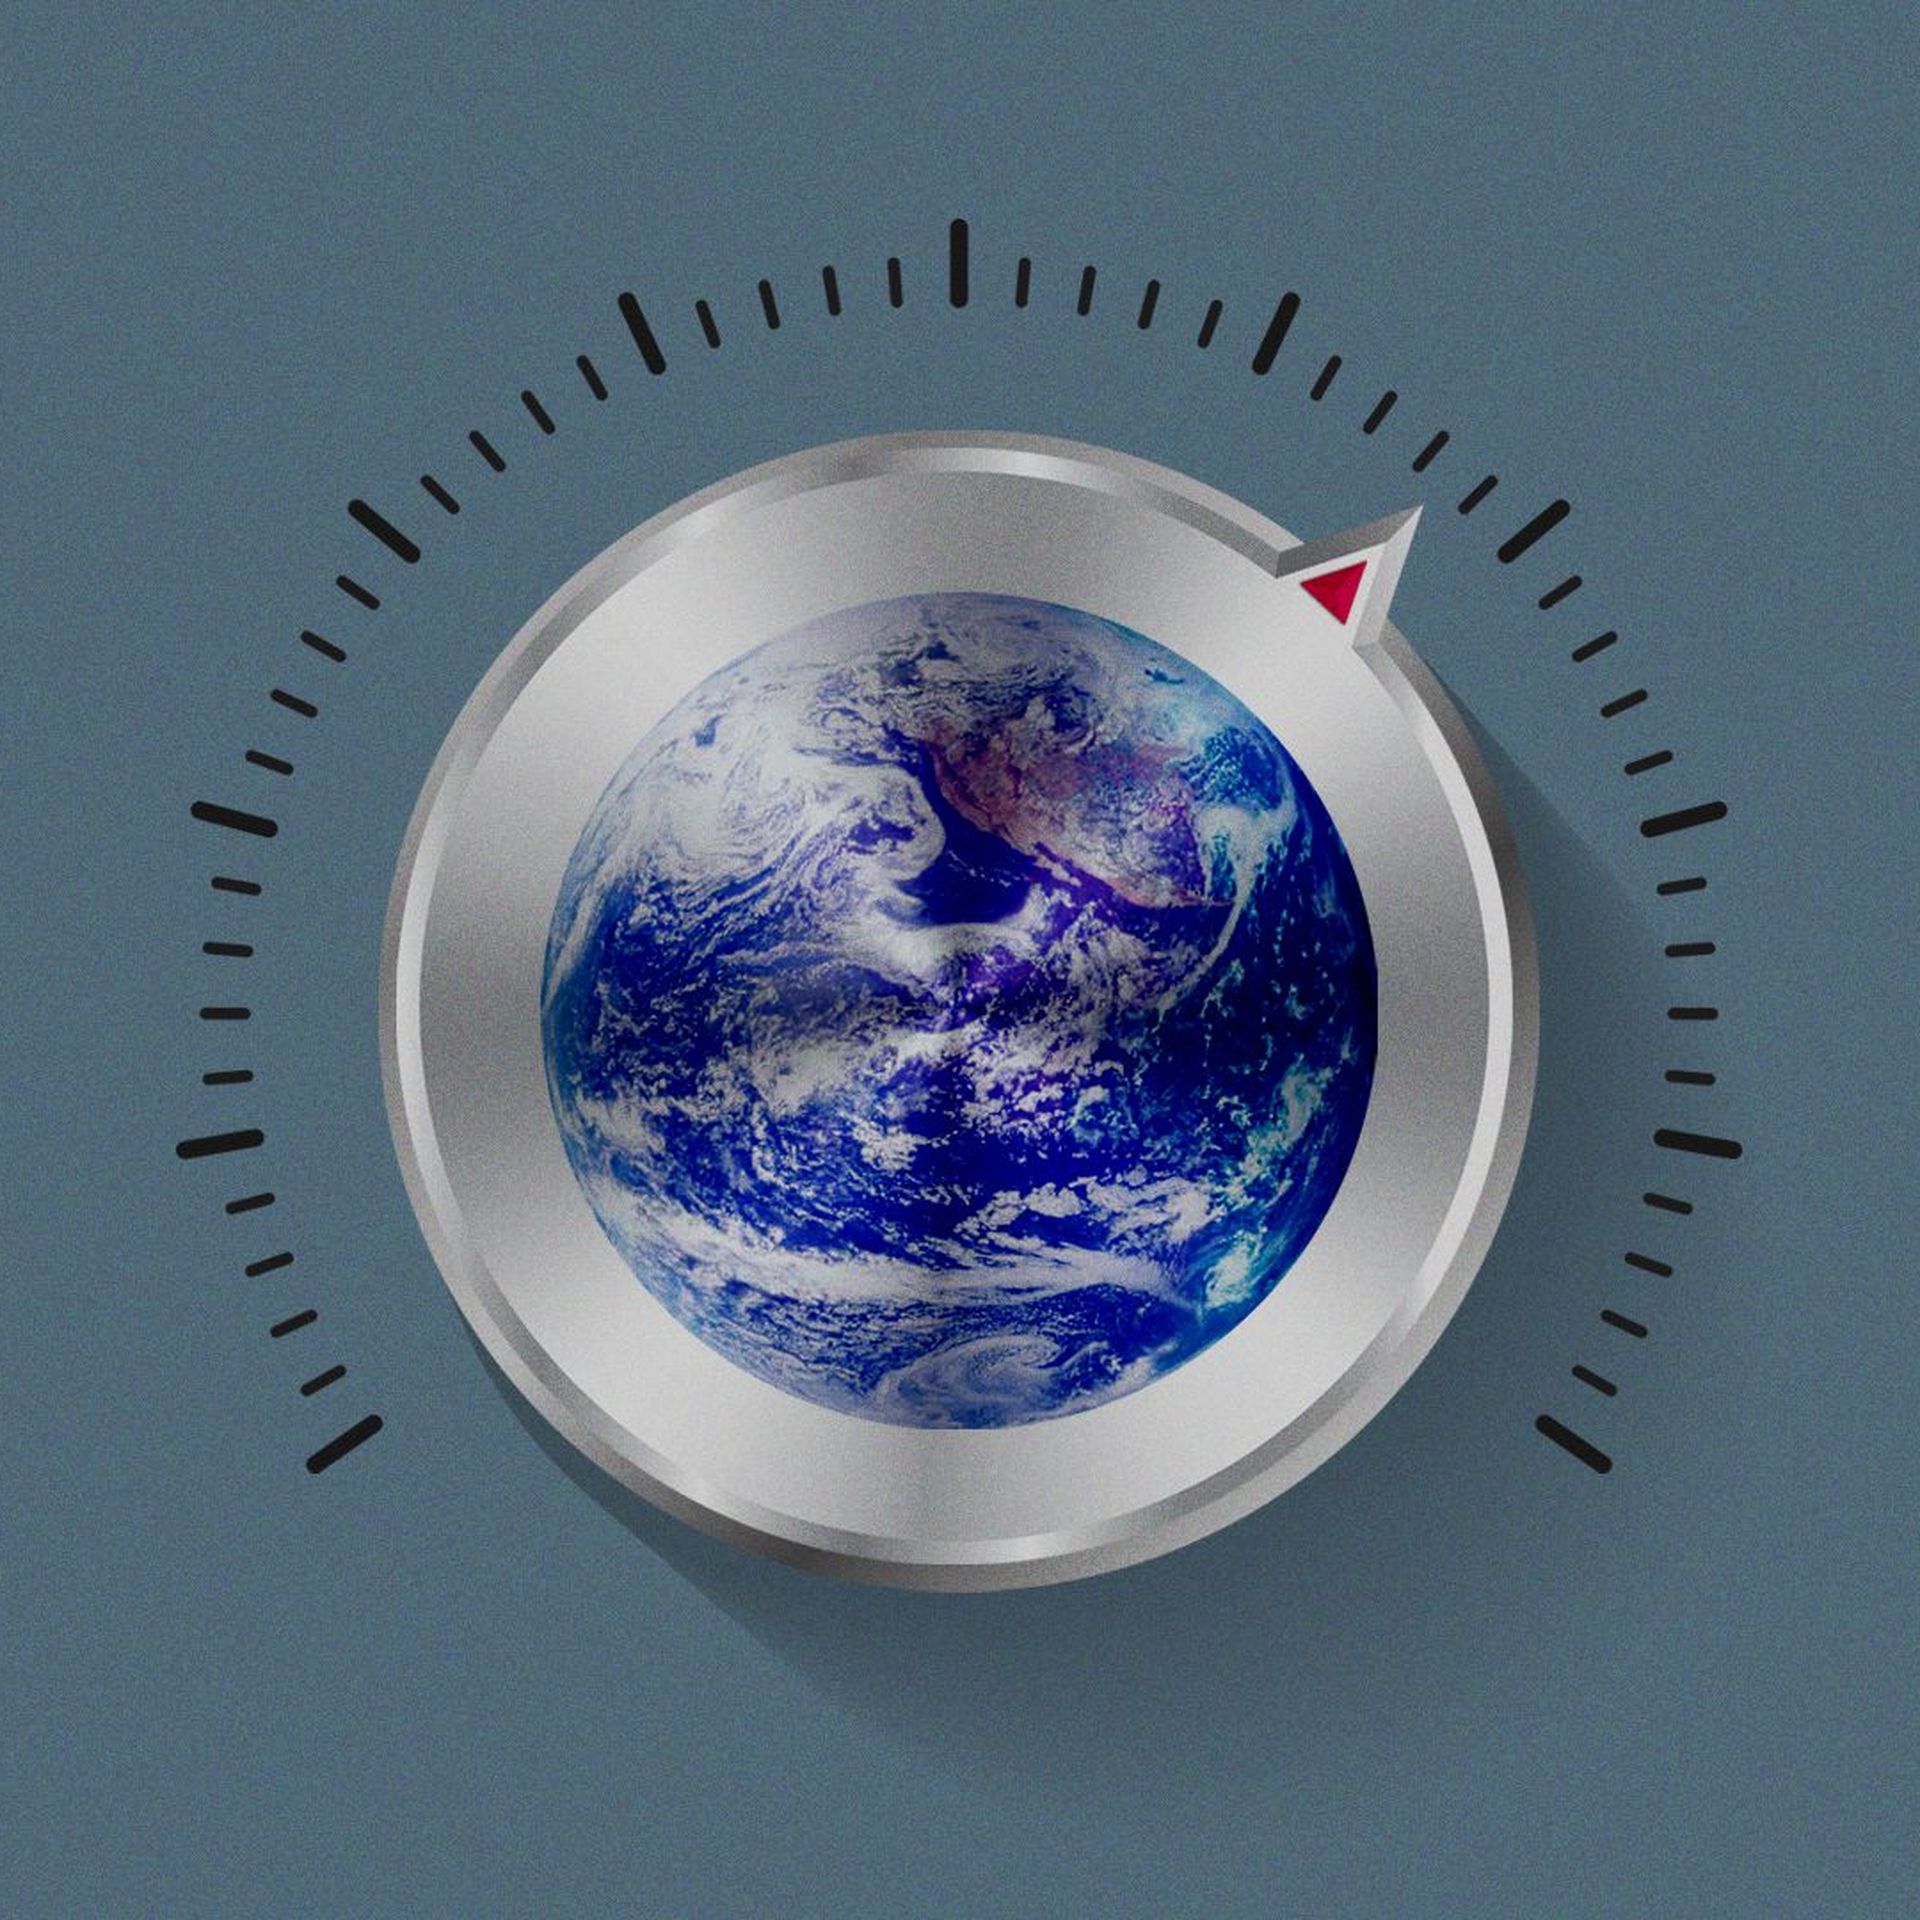 Illustration of a metal dial with the Earth on it, turned upward.